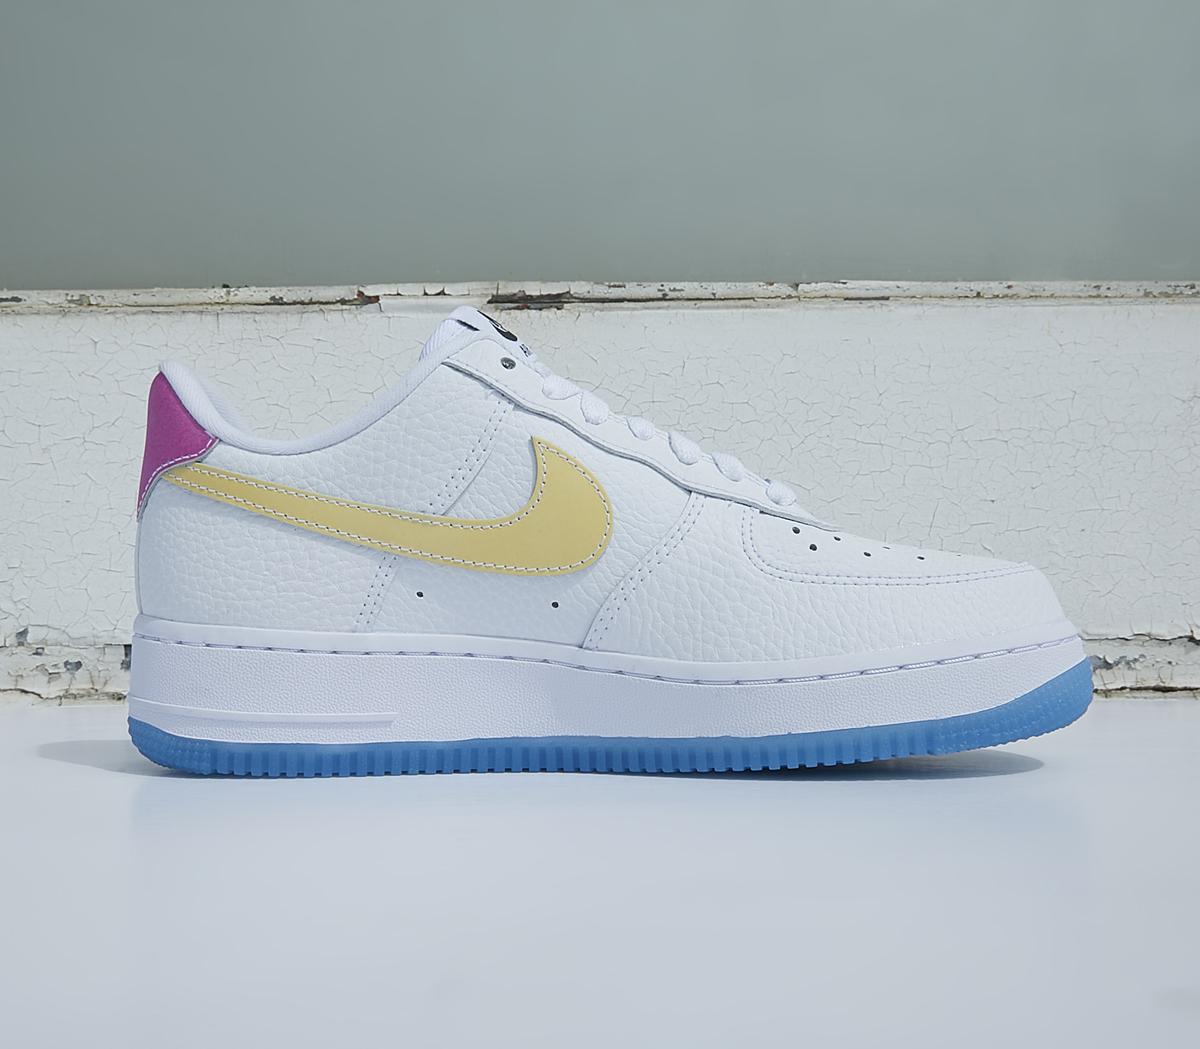 uv air force 1 office